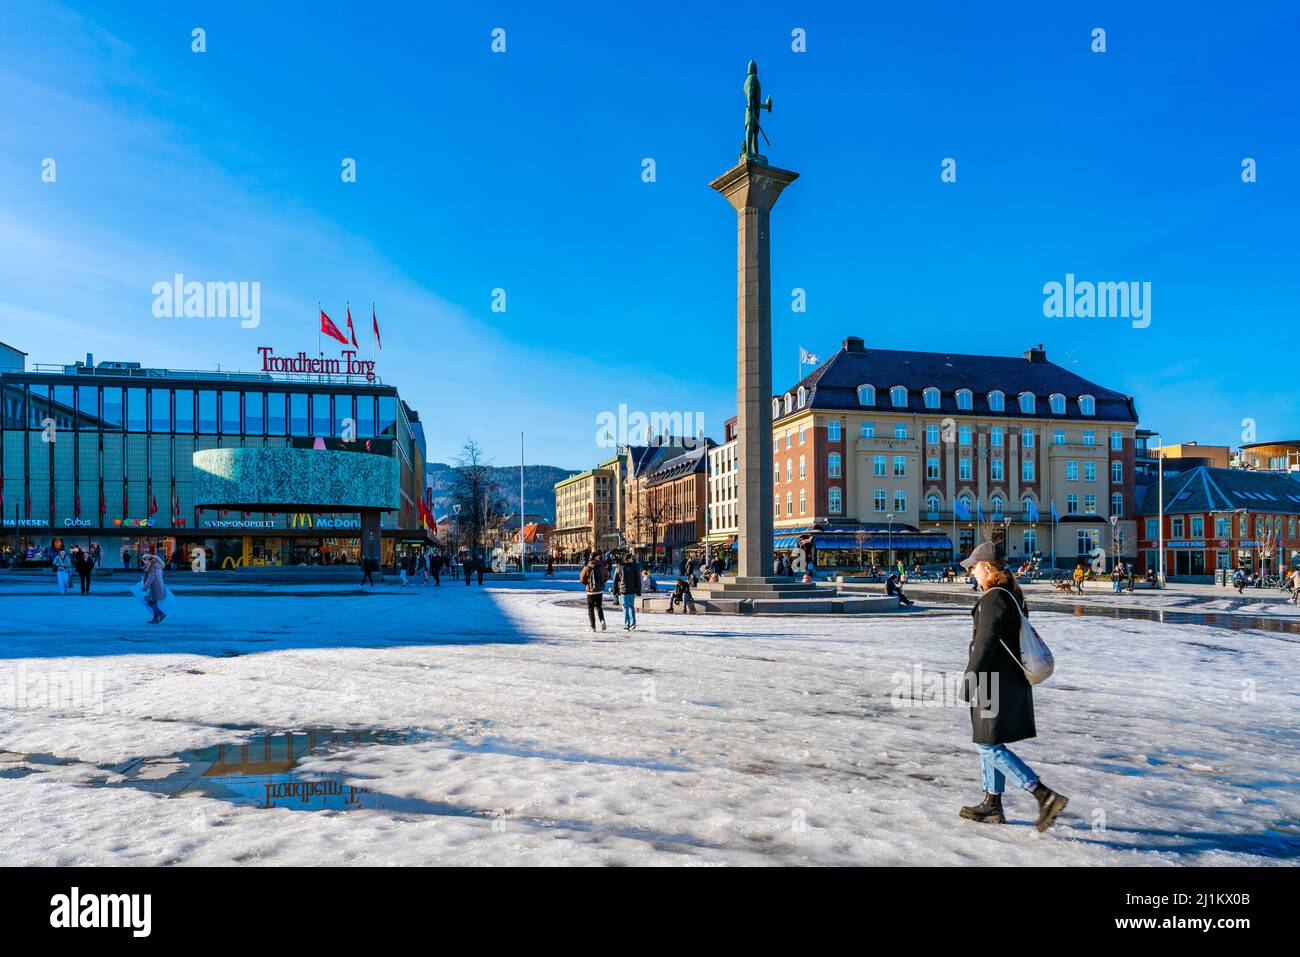 TRONDHEIM, NORWAY - MARCH 11, 2022: Market Square (Torvet) with the statue of Olav Tryggvason, the founder of Trondheim. Stock Photo